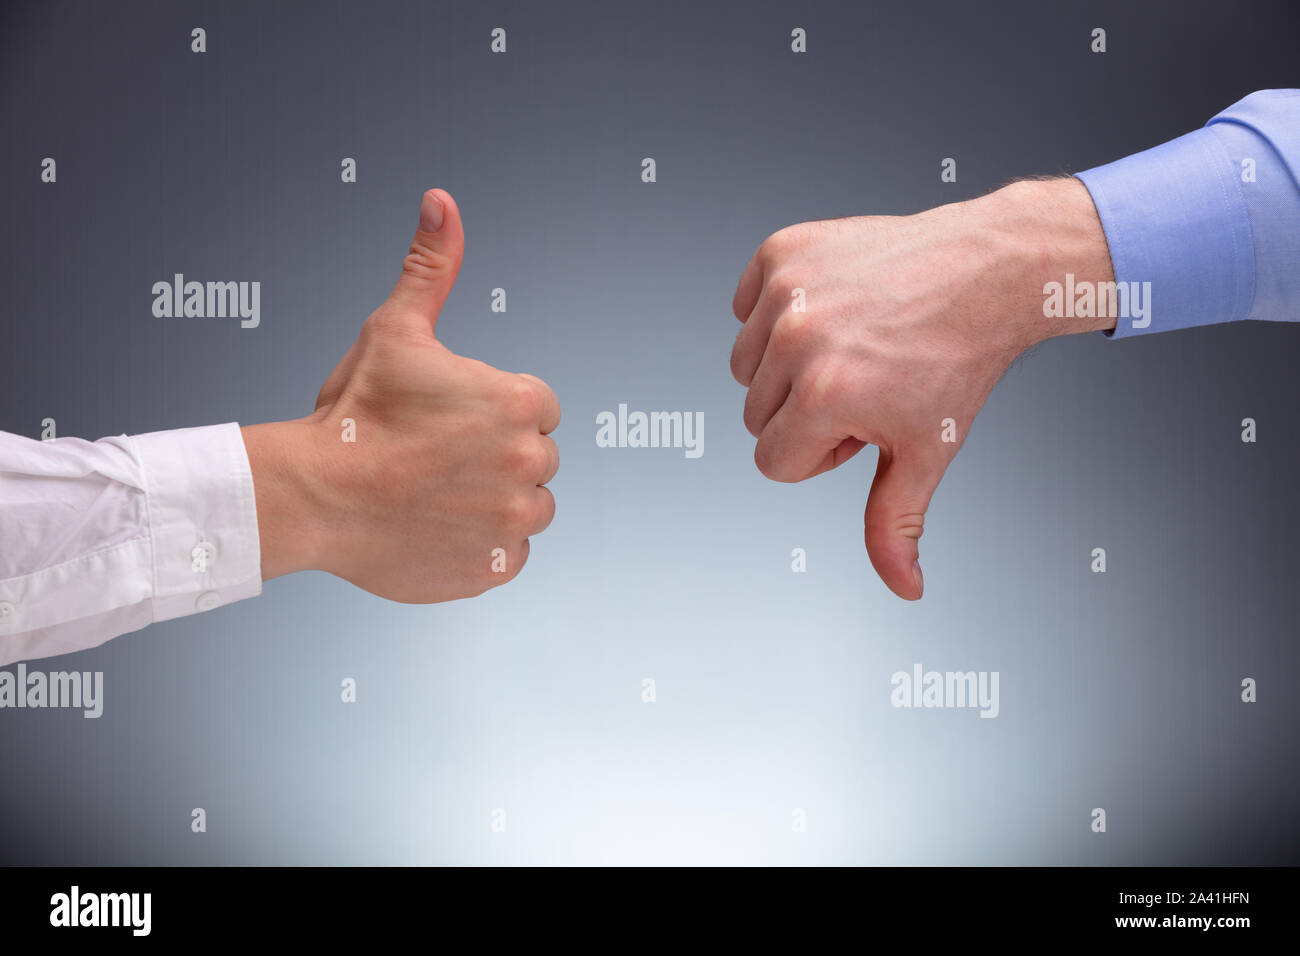 Close-up Of Two Businessman's Hands Showing Thumbs Up And Down Sign Against Gray Background Stock Photo